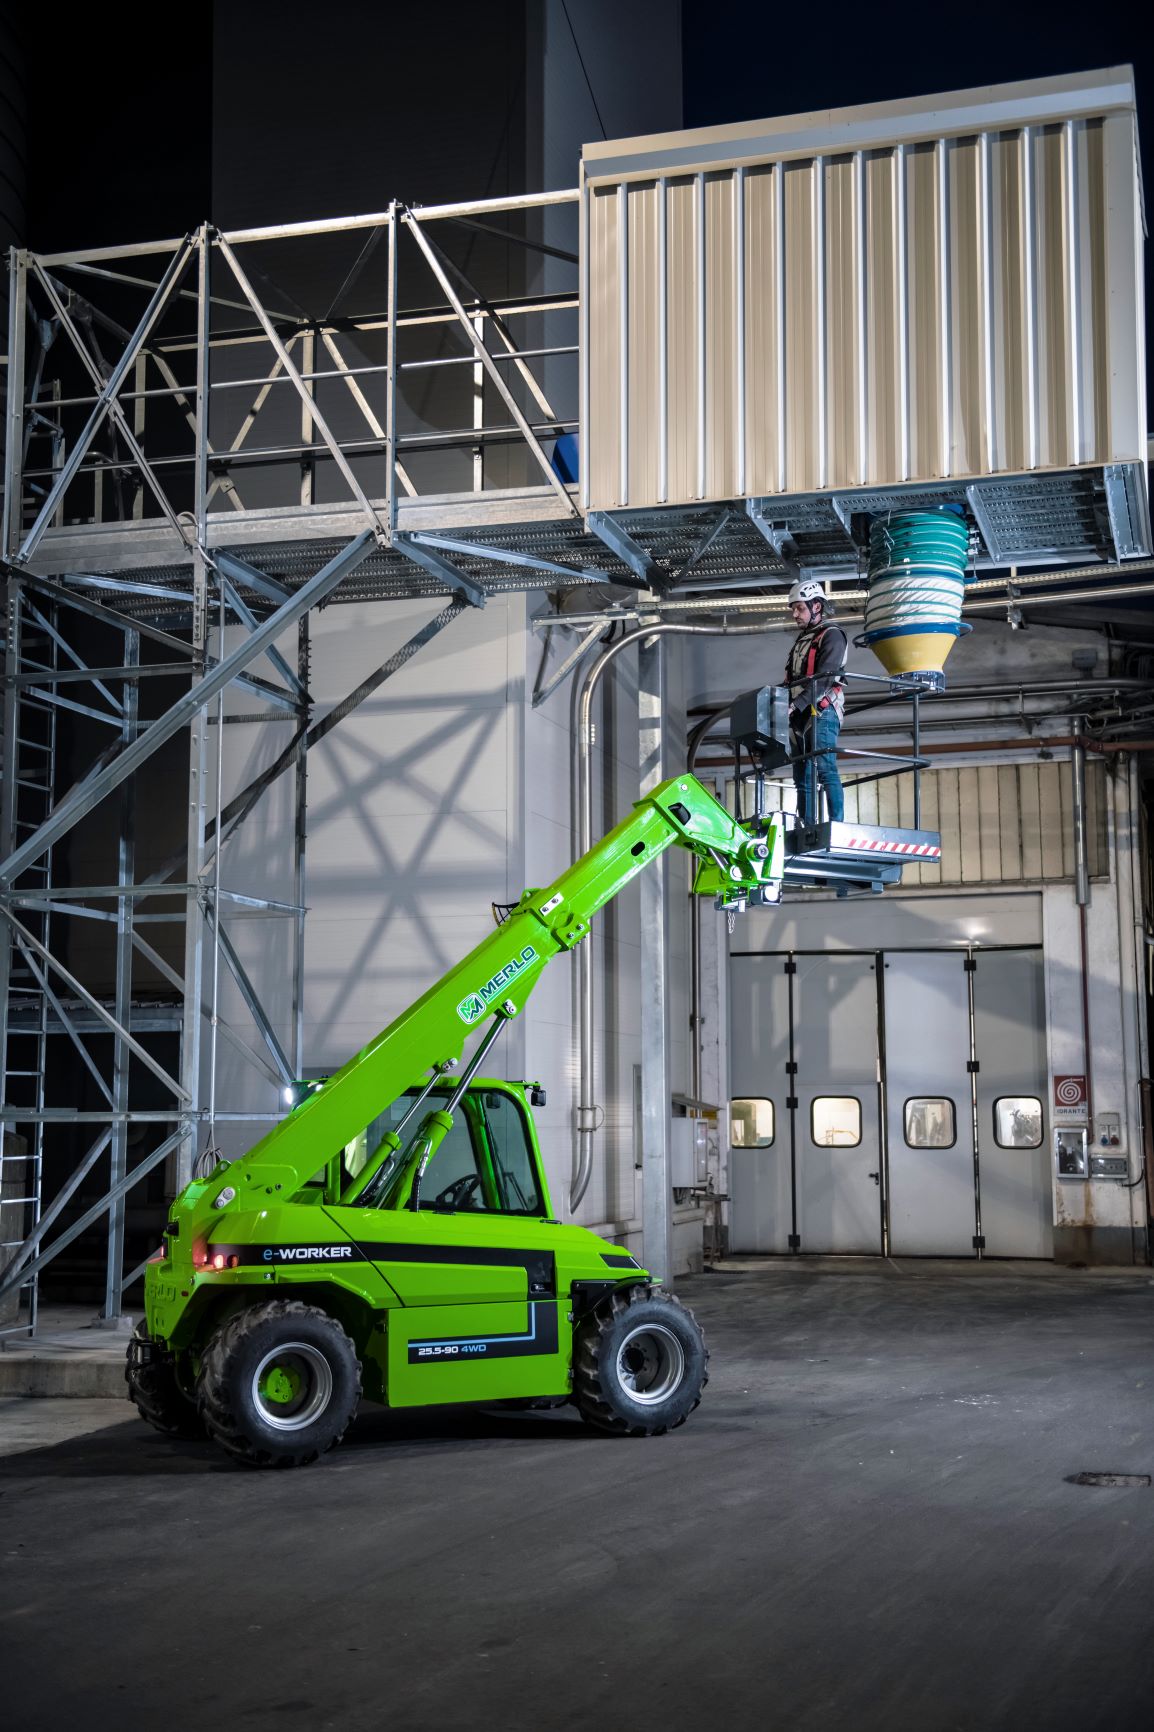 The Merlo eWorker 25.5 90 electric telehandler. Man basket attached and a man standing in it to operate. 